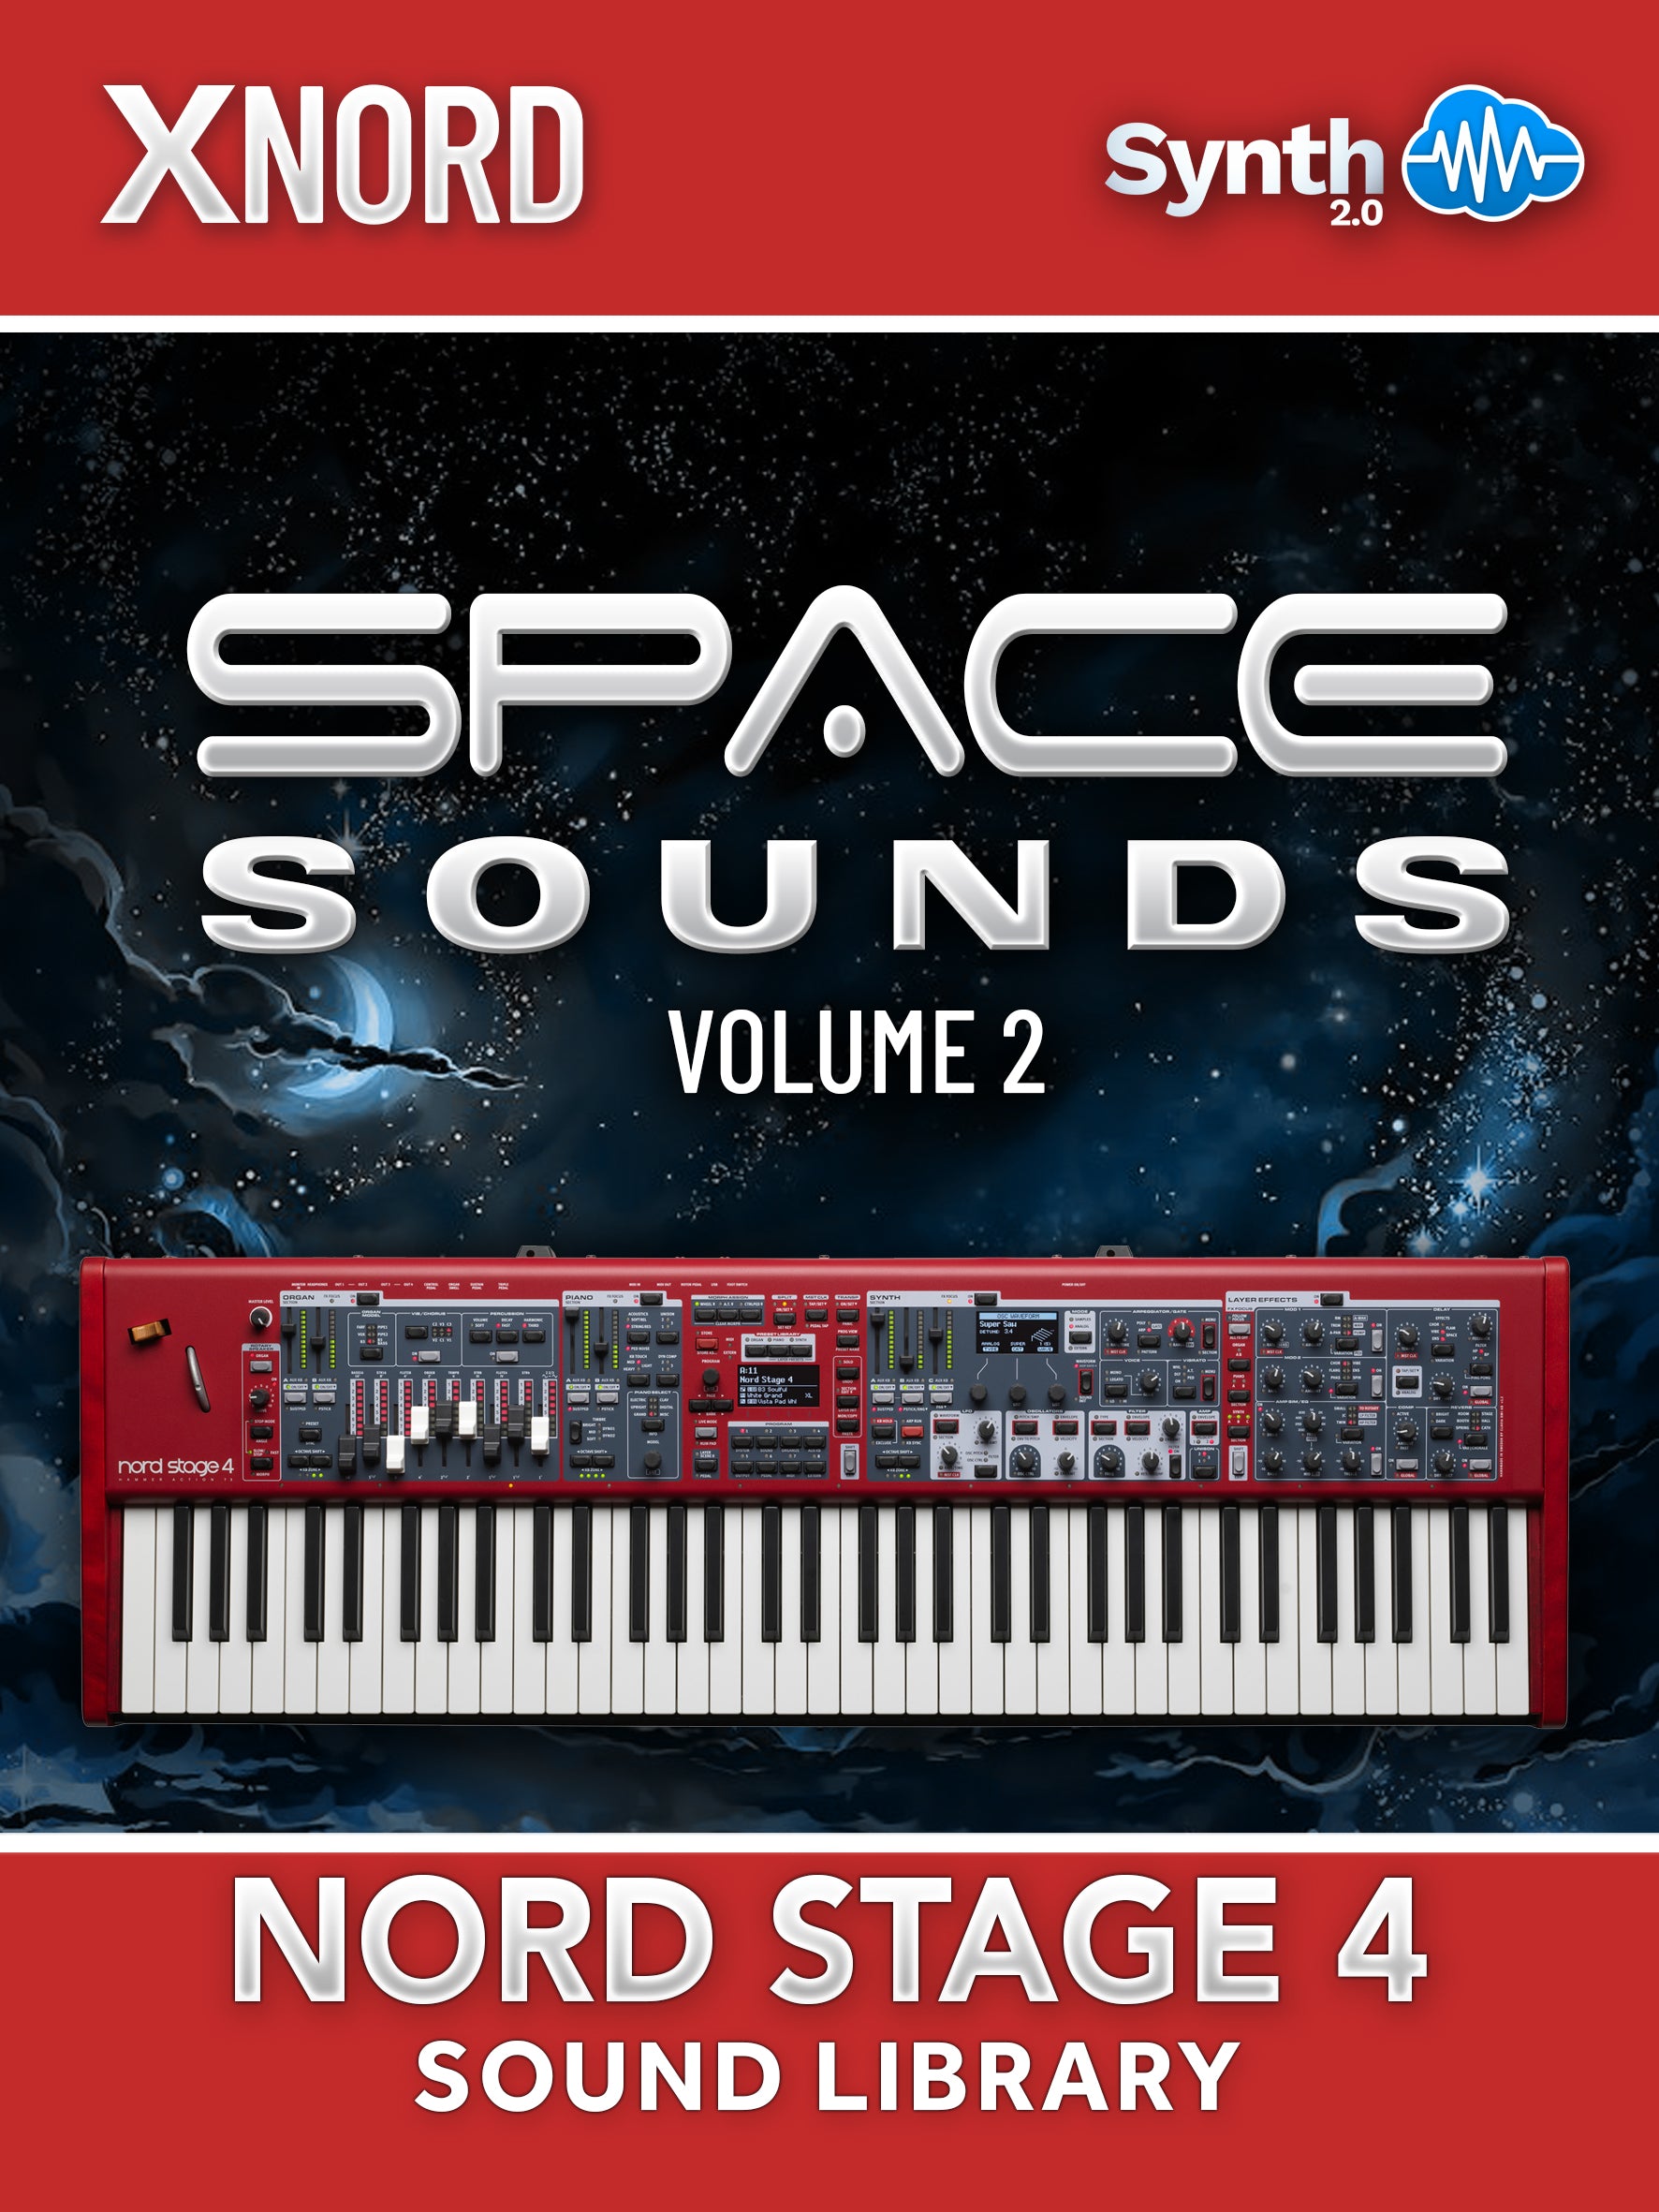 SCL426 - ( Bundle ) - SD Orquestral + Space Sounds Vol.2 - Nord Stage 4